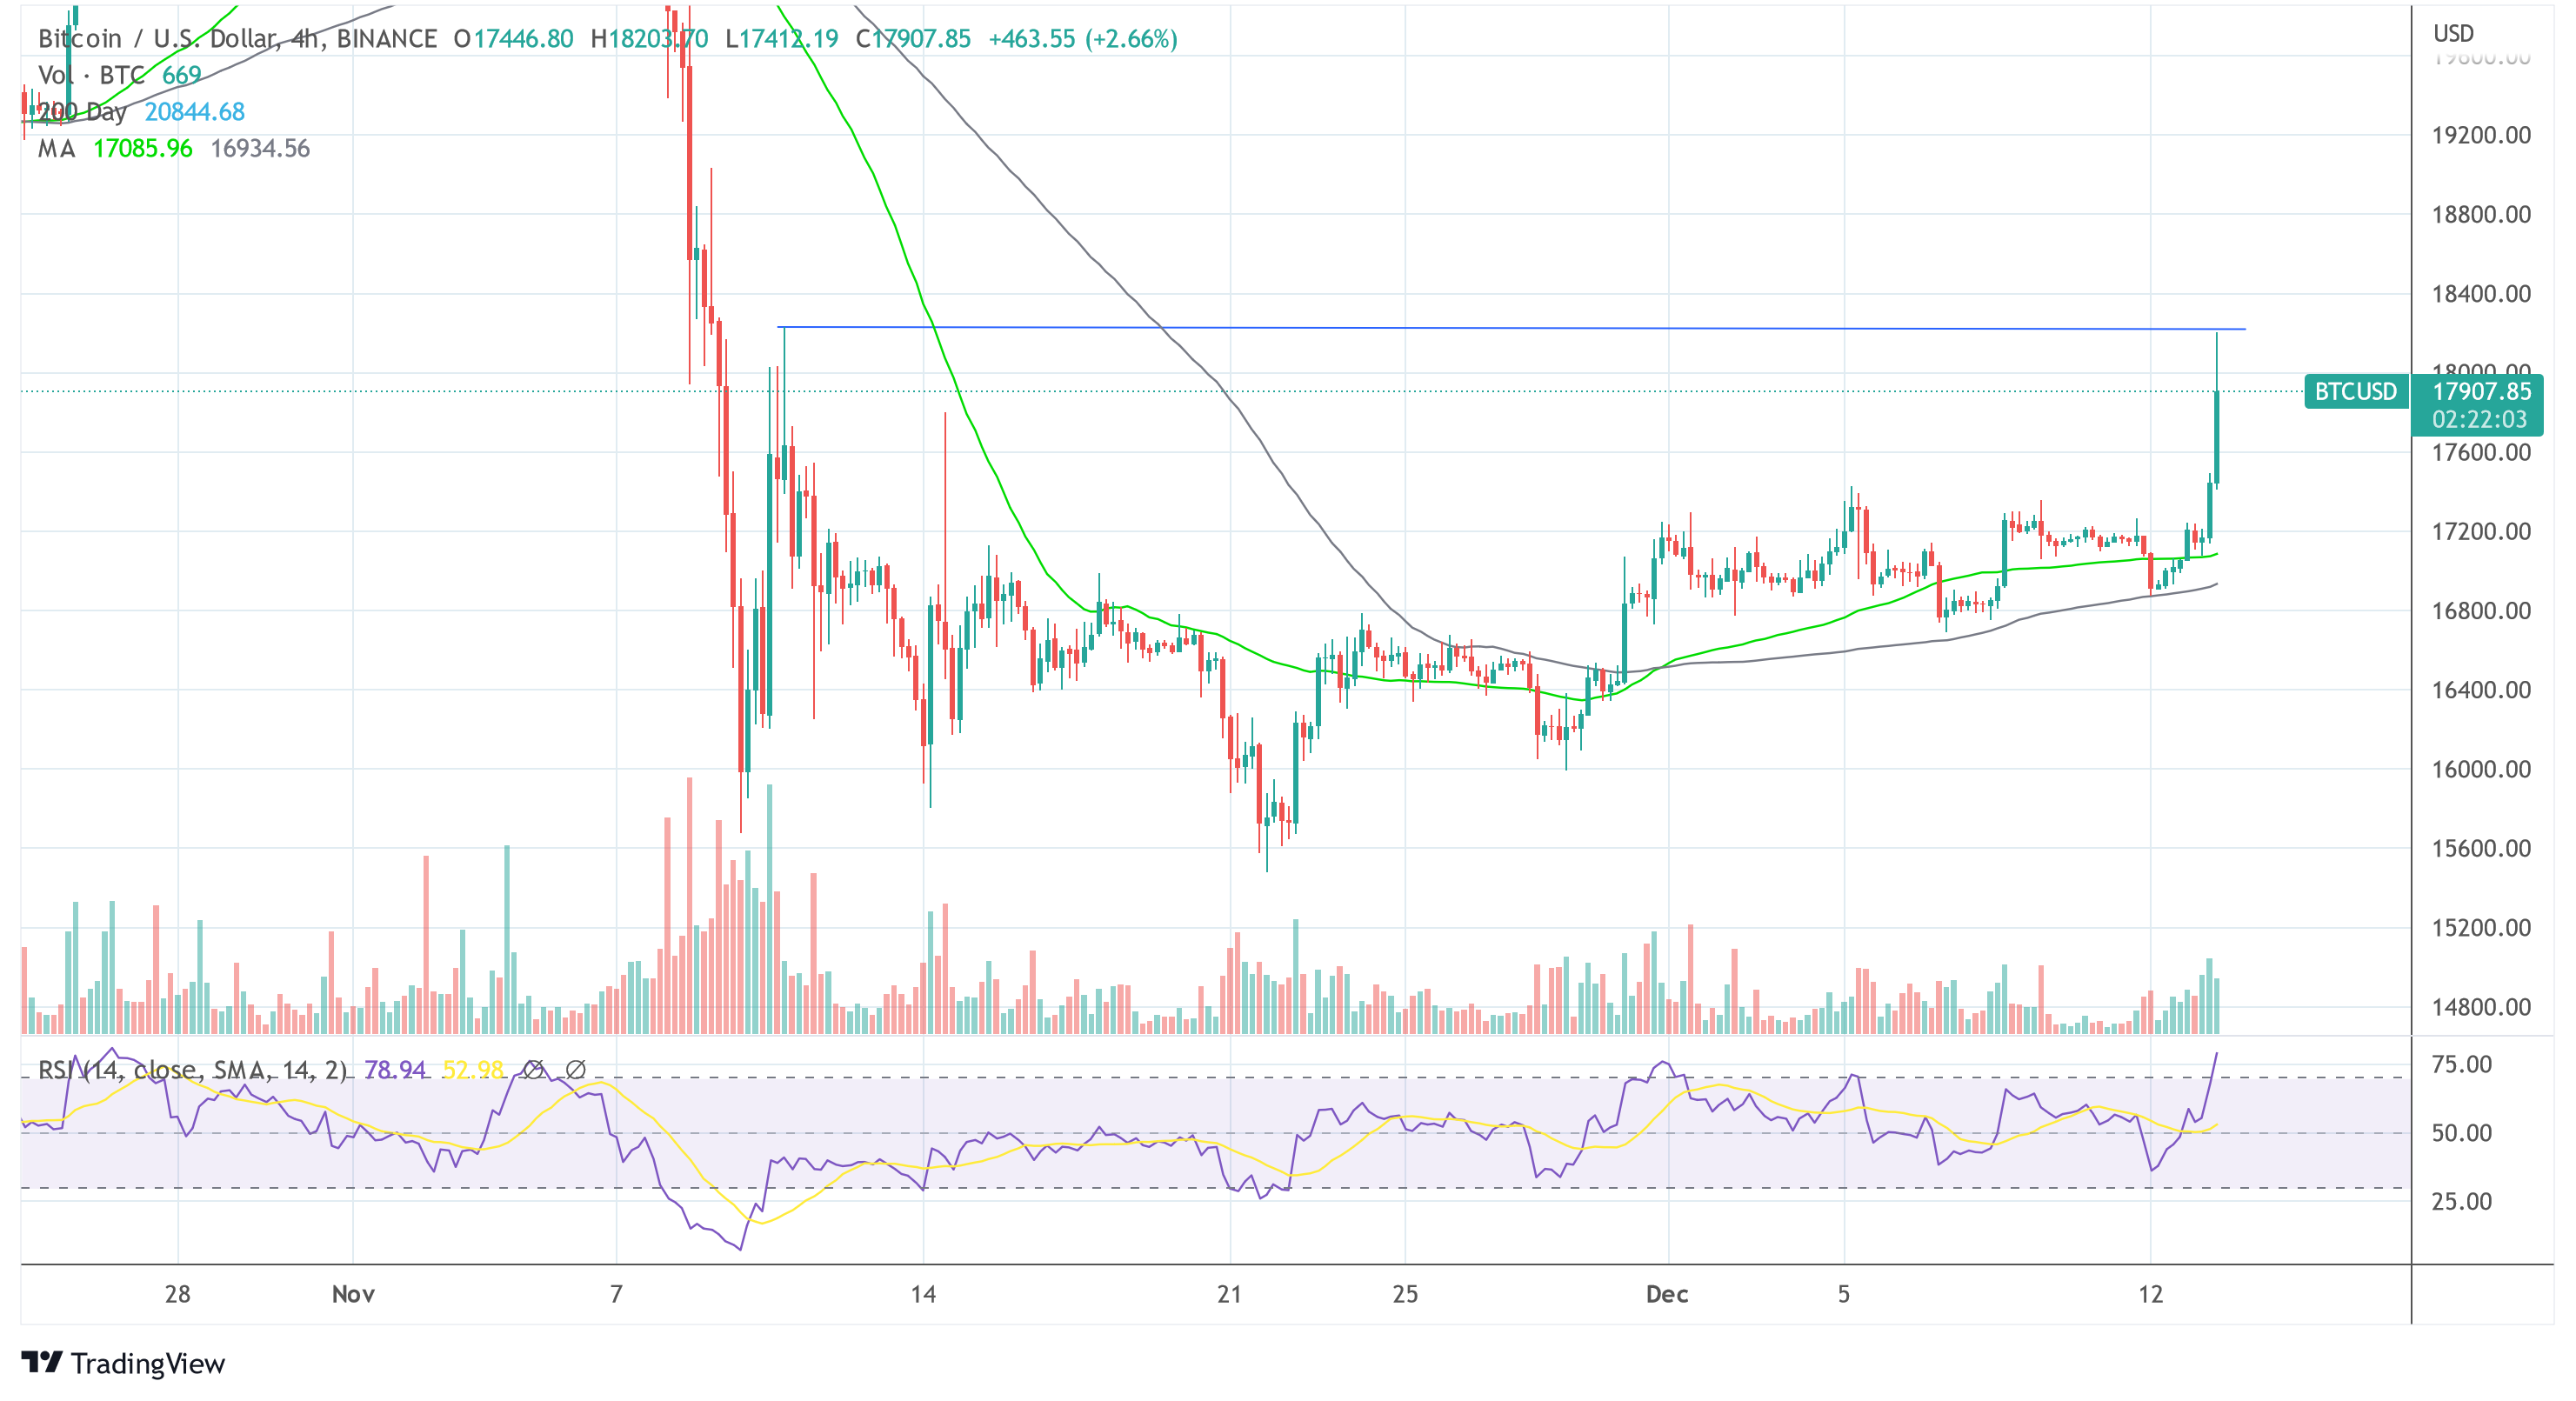 Bitcoin Price Breaks Above $18,200 – CPI Data Comes in Better Than Expected